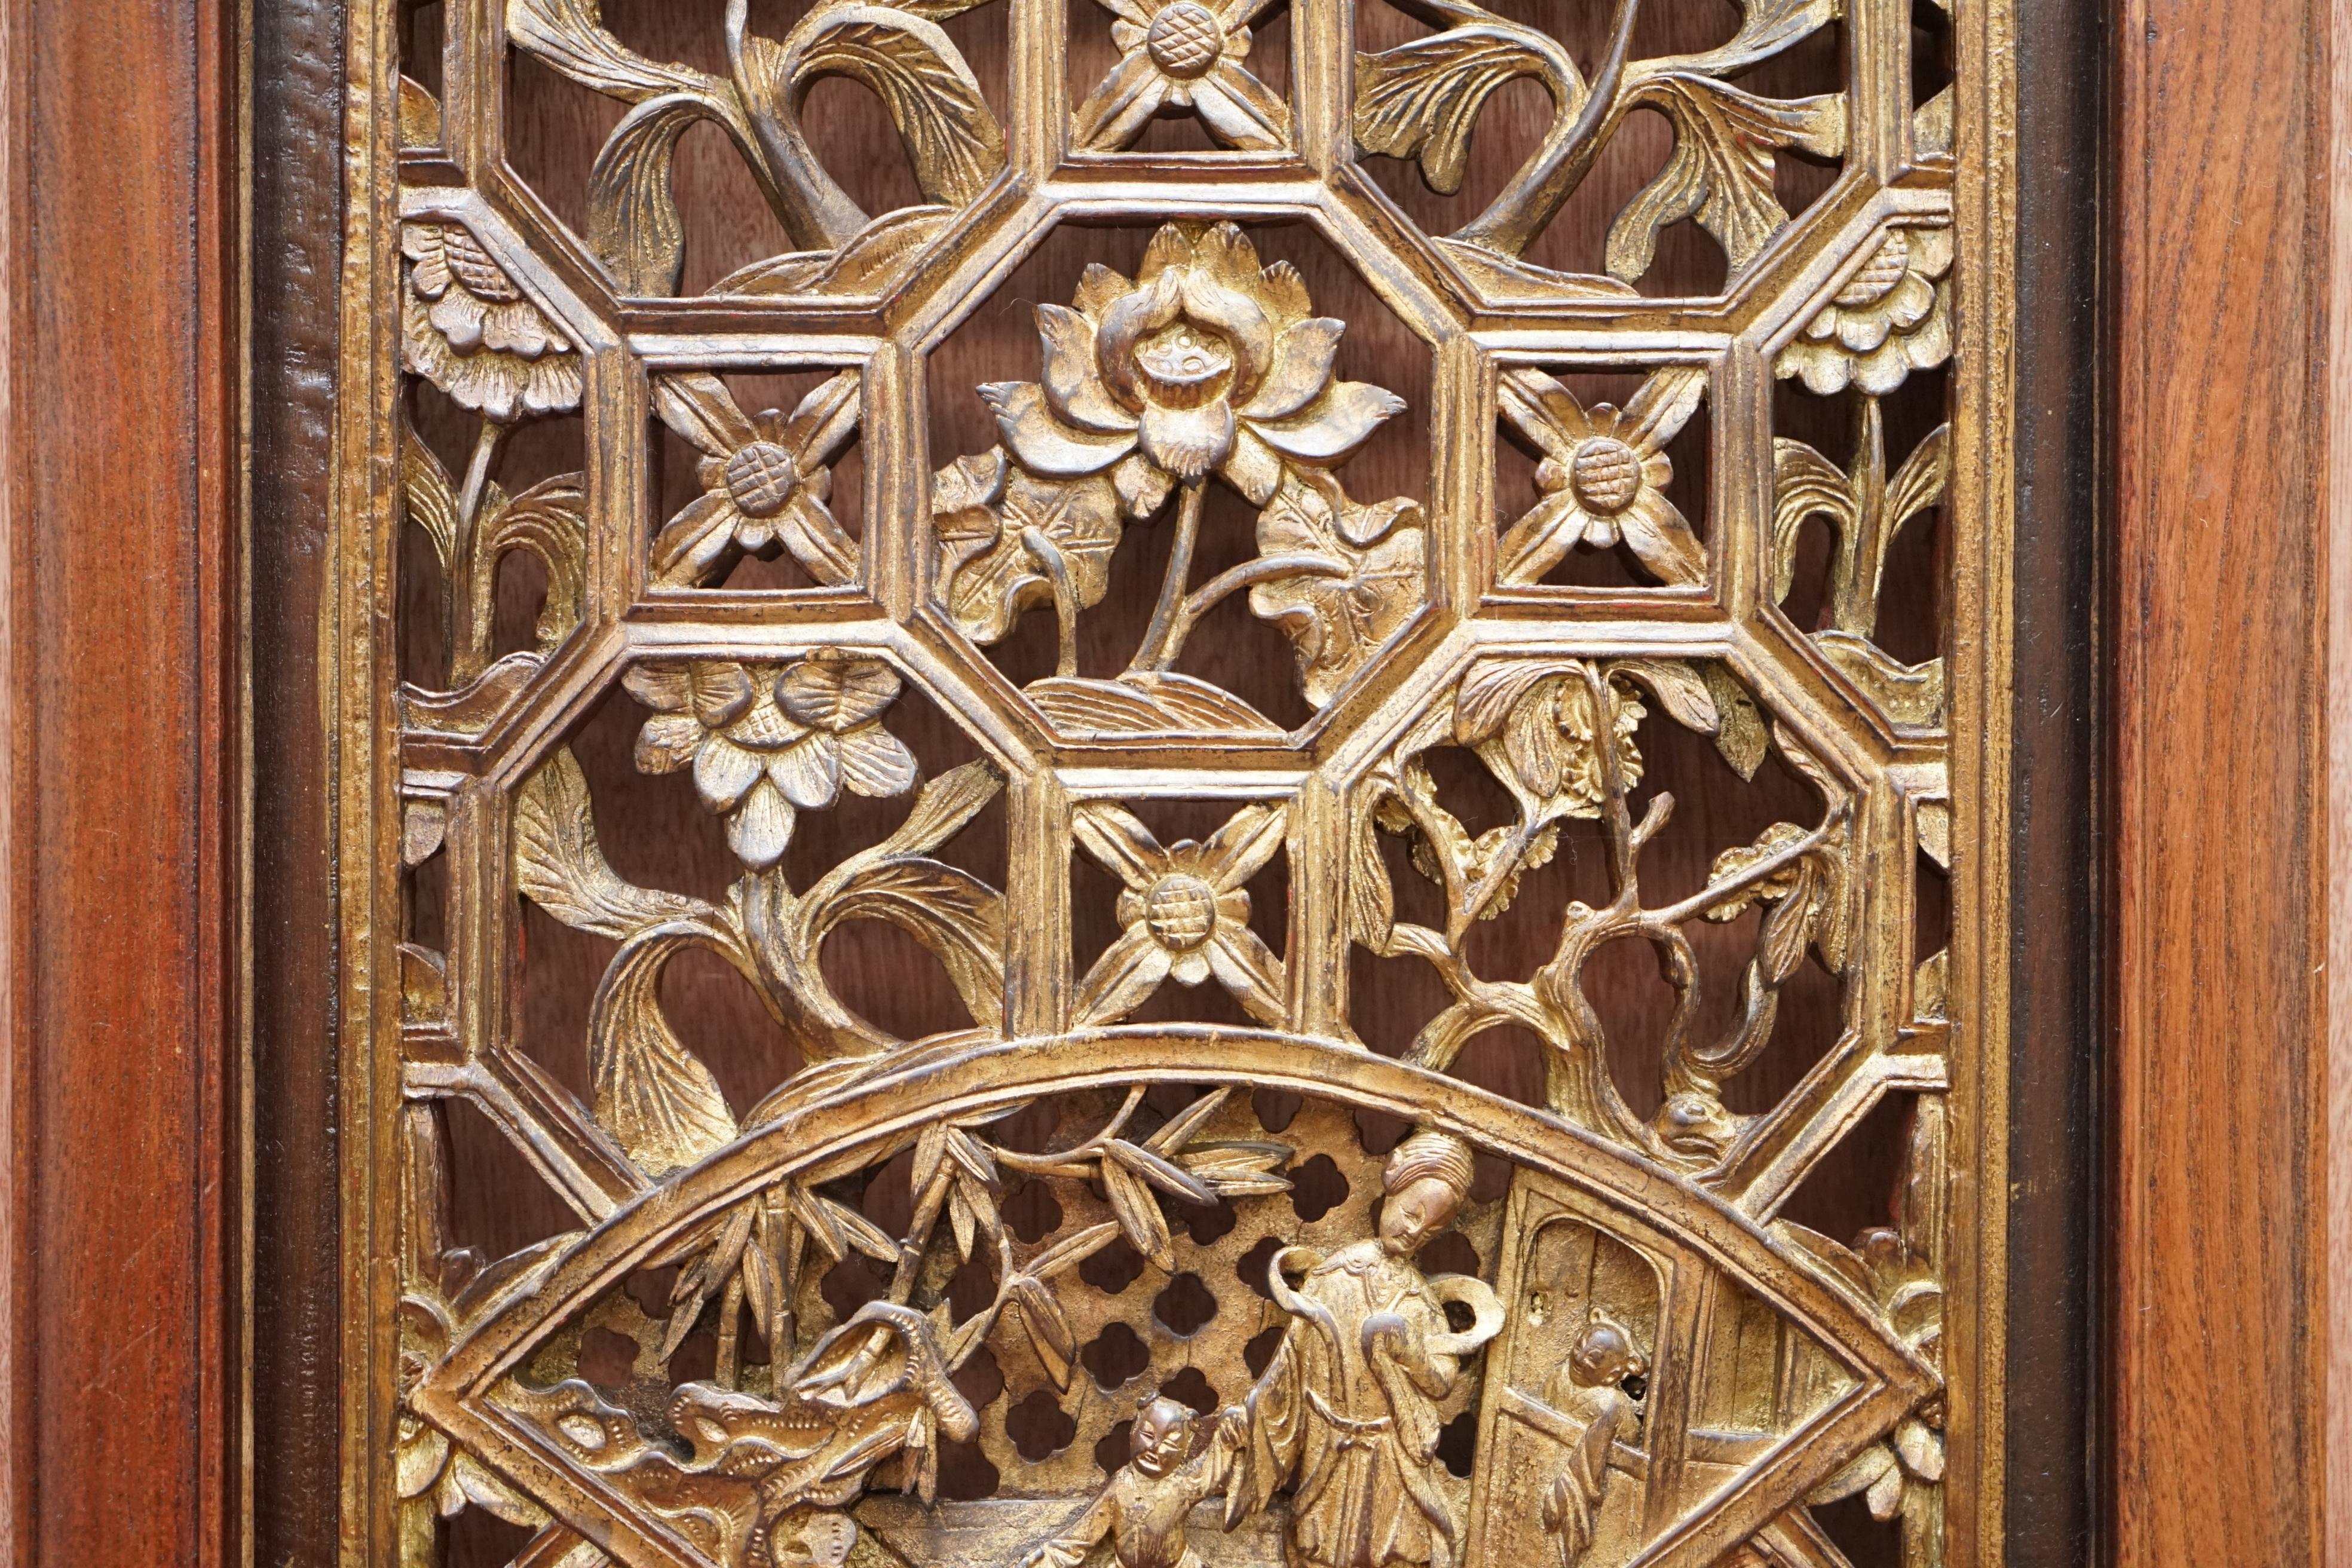 Chinese Export circa 1900 Gold Leaf Painted Fret Work Carved Wall Panel in Teak For Sale 1